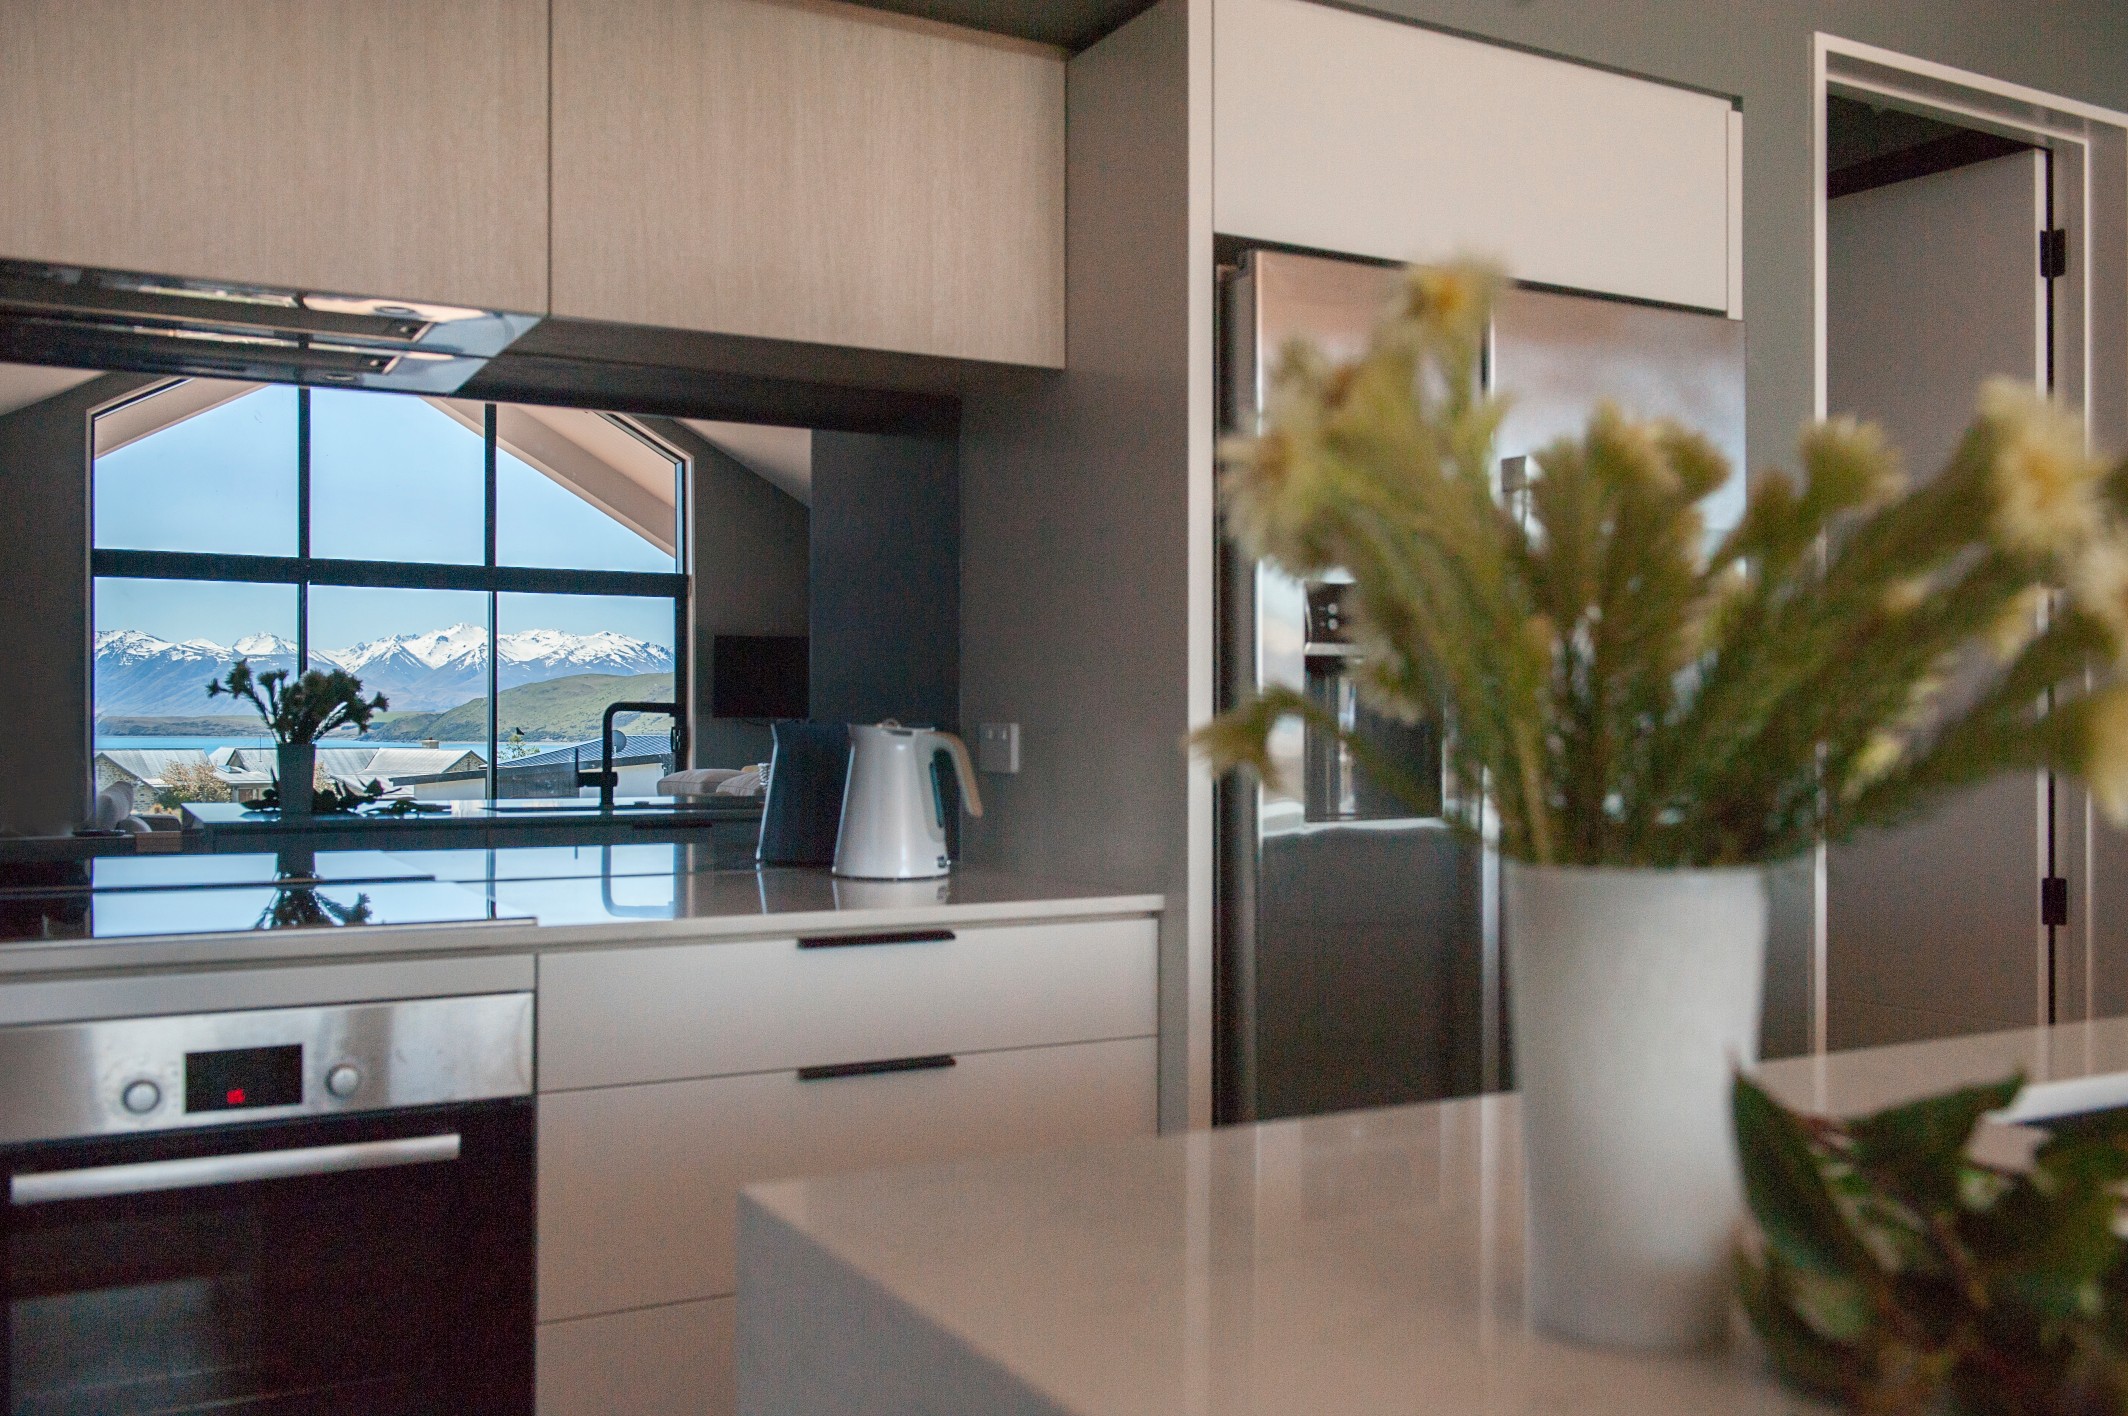  A mirrored splash back reflects the Southern Alps